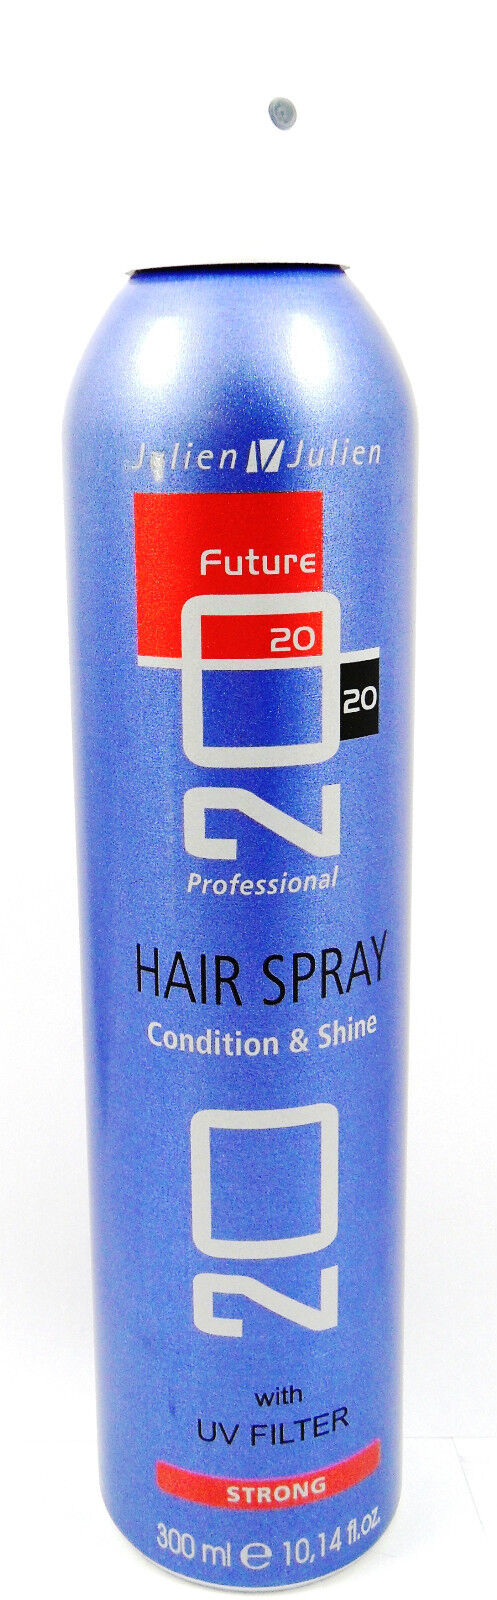 Future 20 professional Hair Spray with UV Filter Strong 300ml